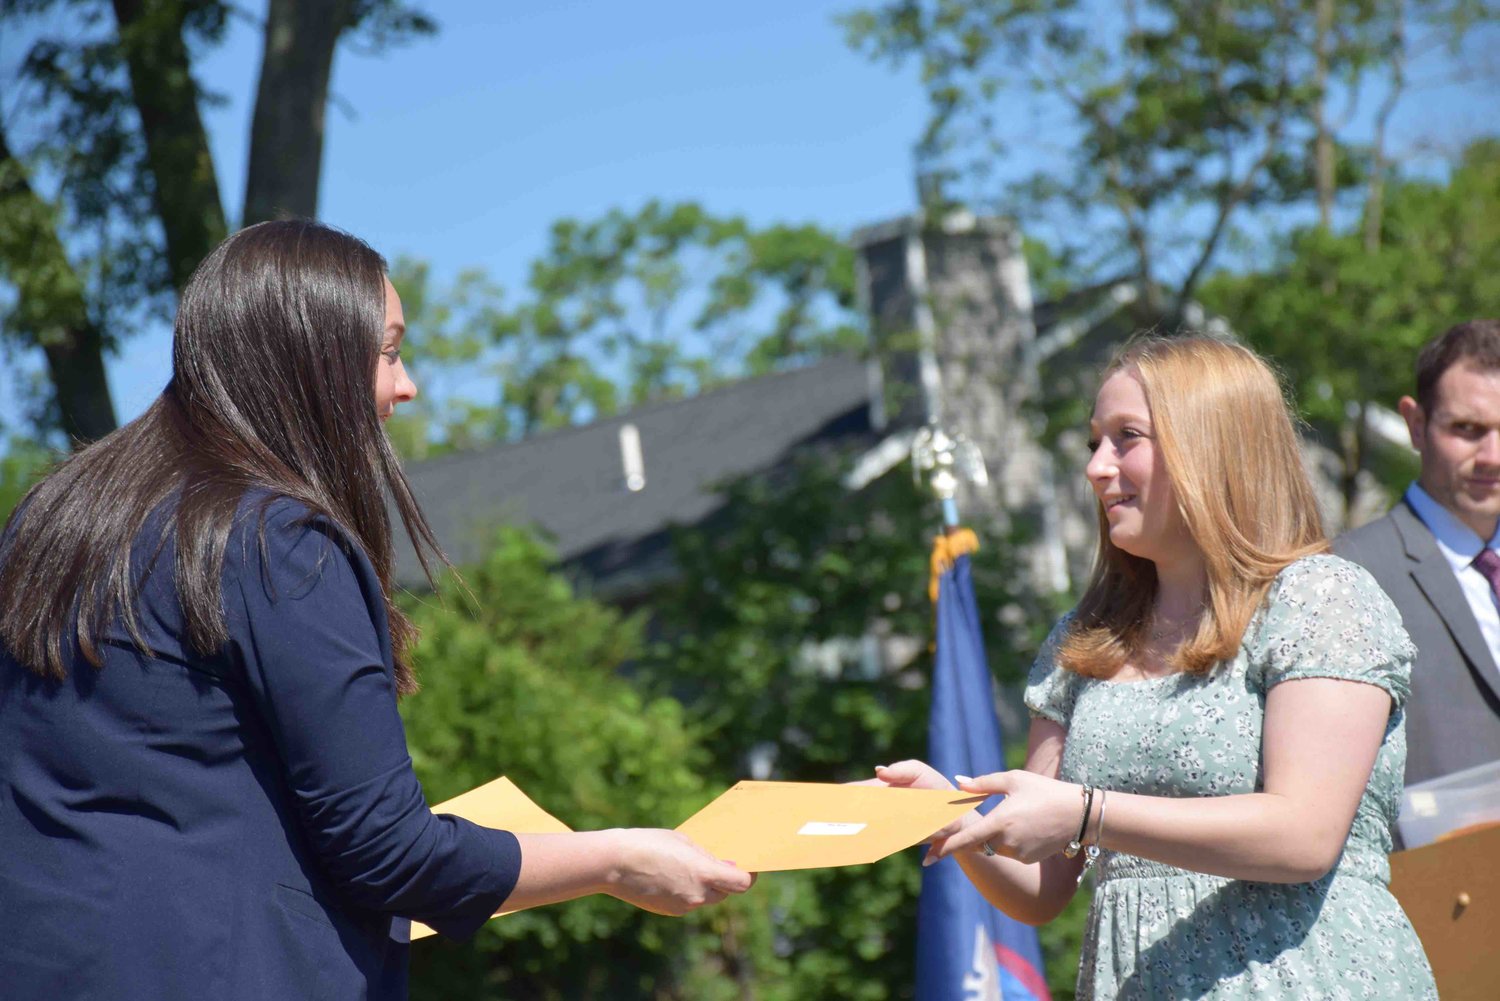 Students accepted their graduation diplomas.